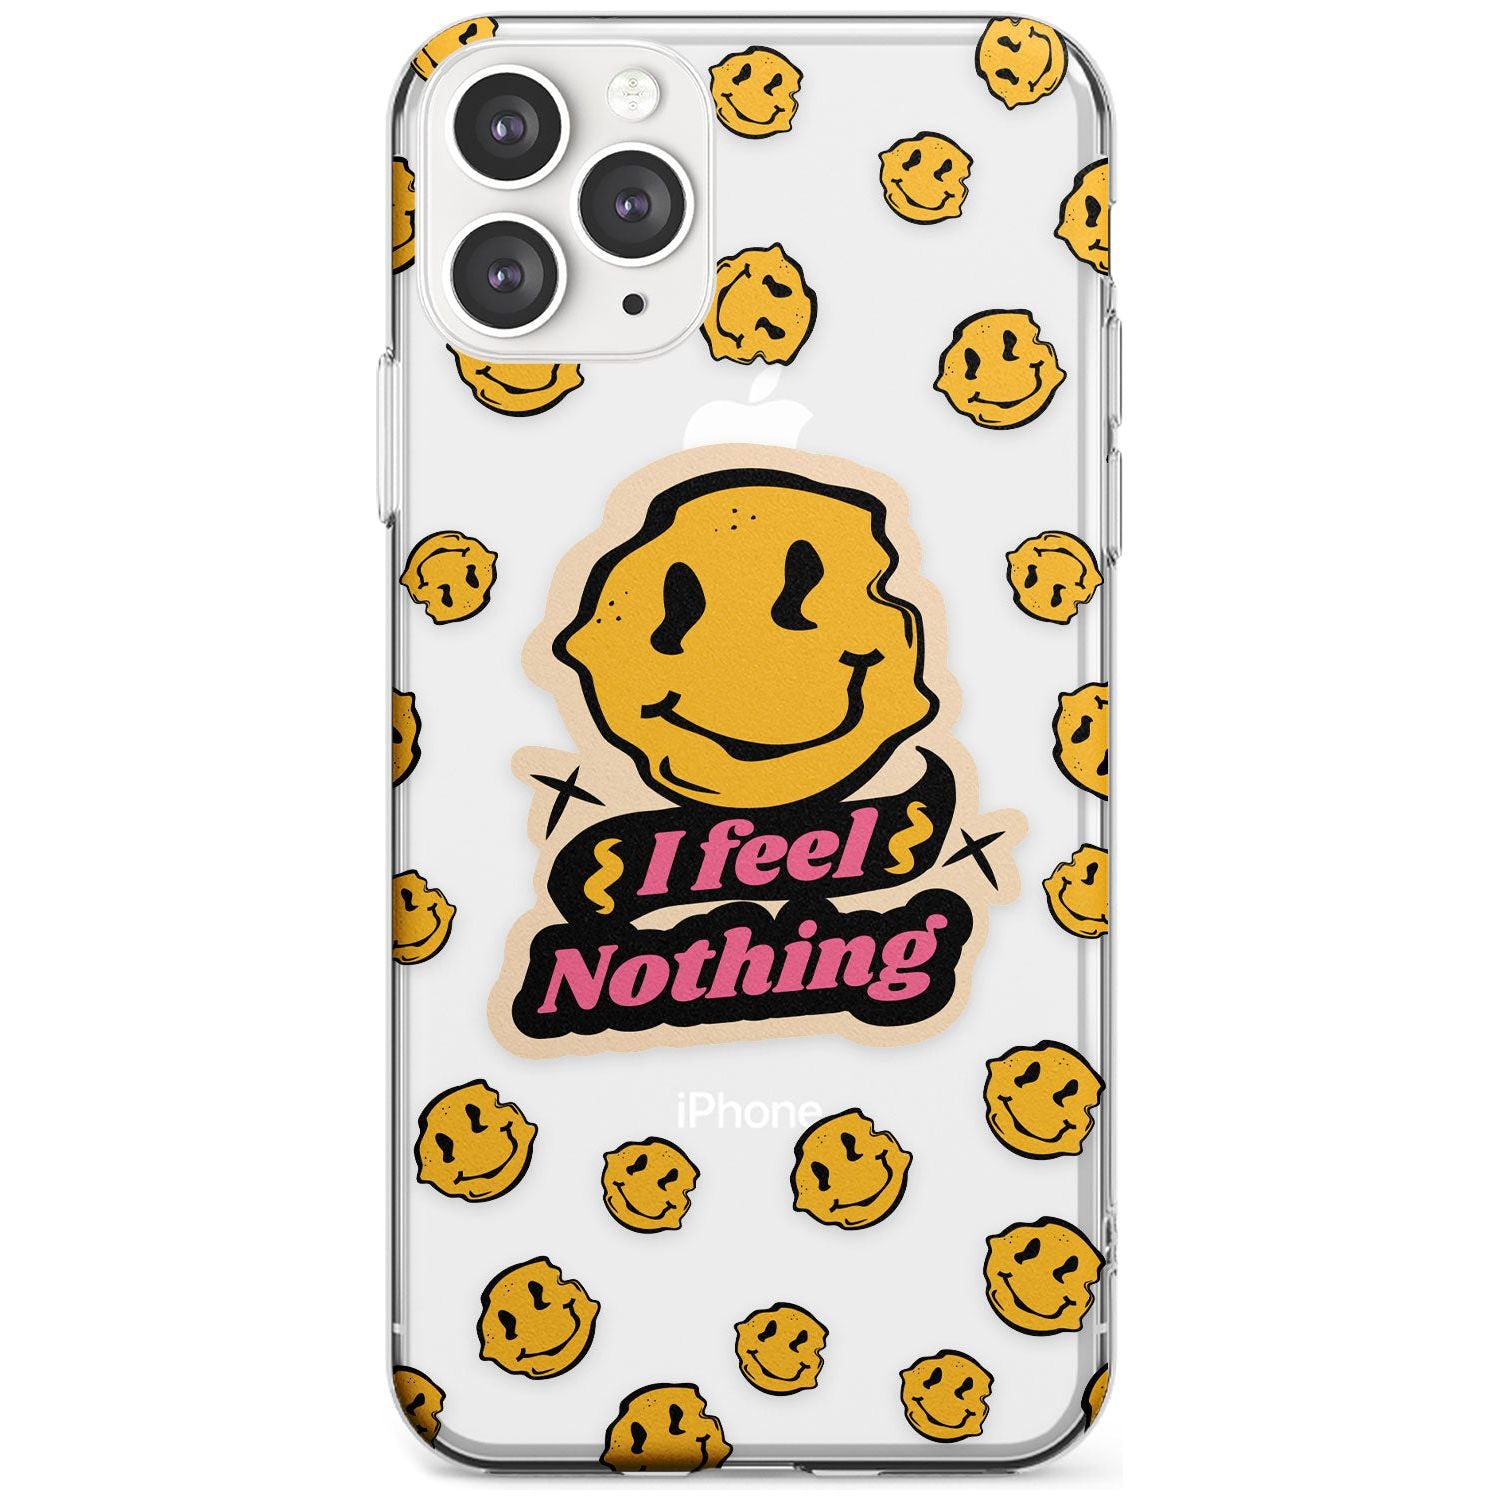 I feel nothing (Clear) Slim TPU Phone Case for iPhone 11 Pro Max